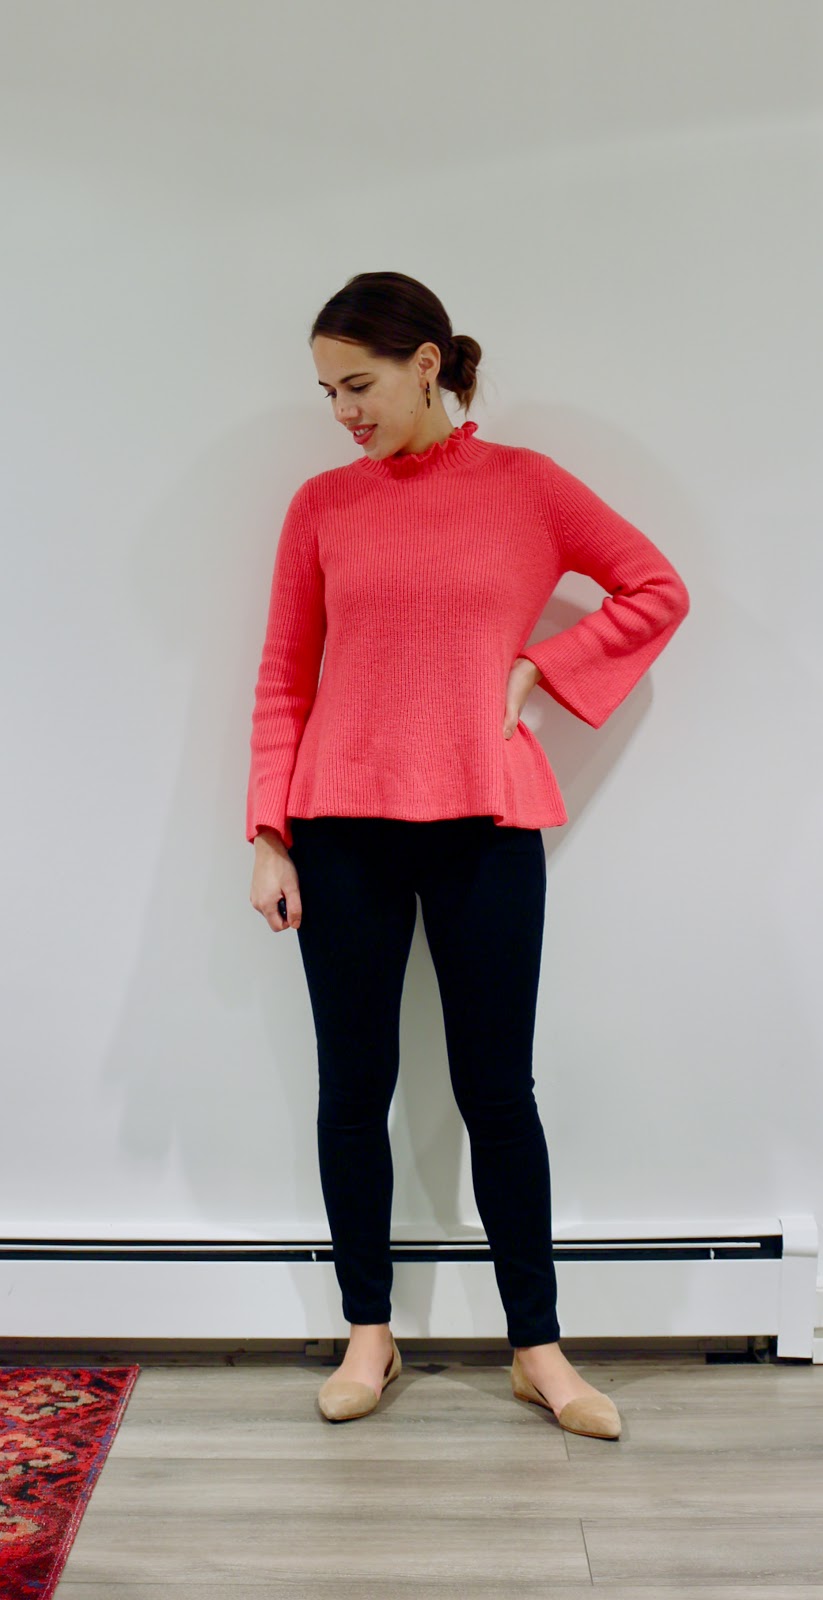 Jules in Flats - Pink Ruffle Mock Neck Swing Sweater (Business Casual Fall Workwear on a Budget)